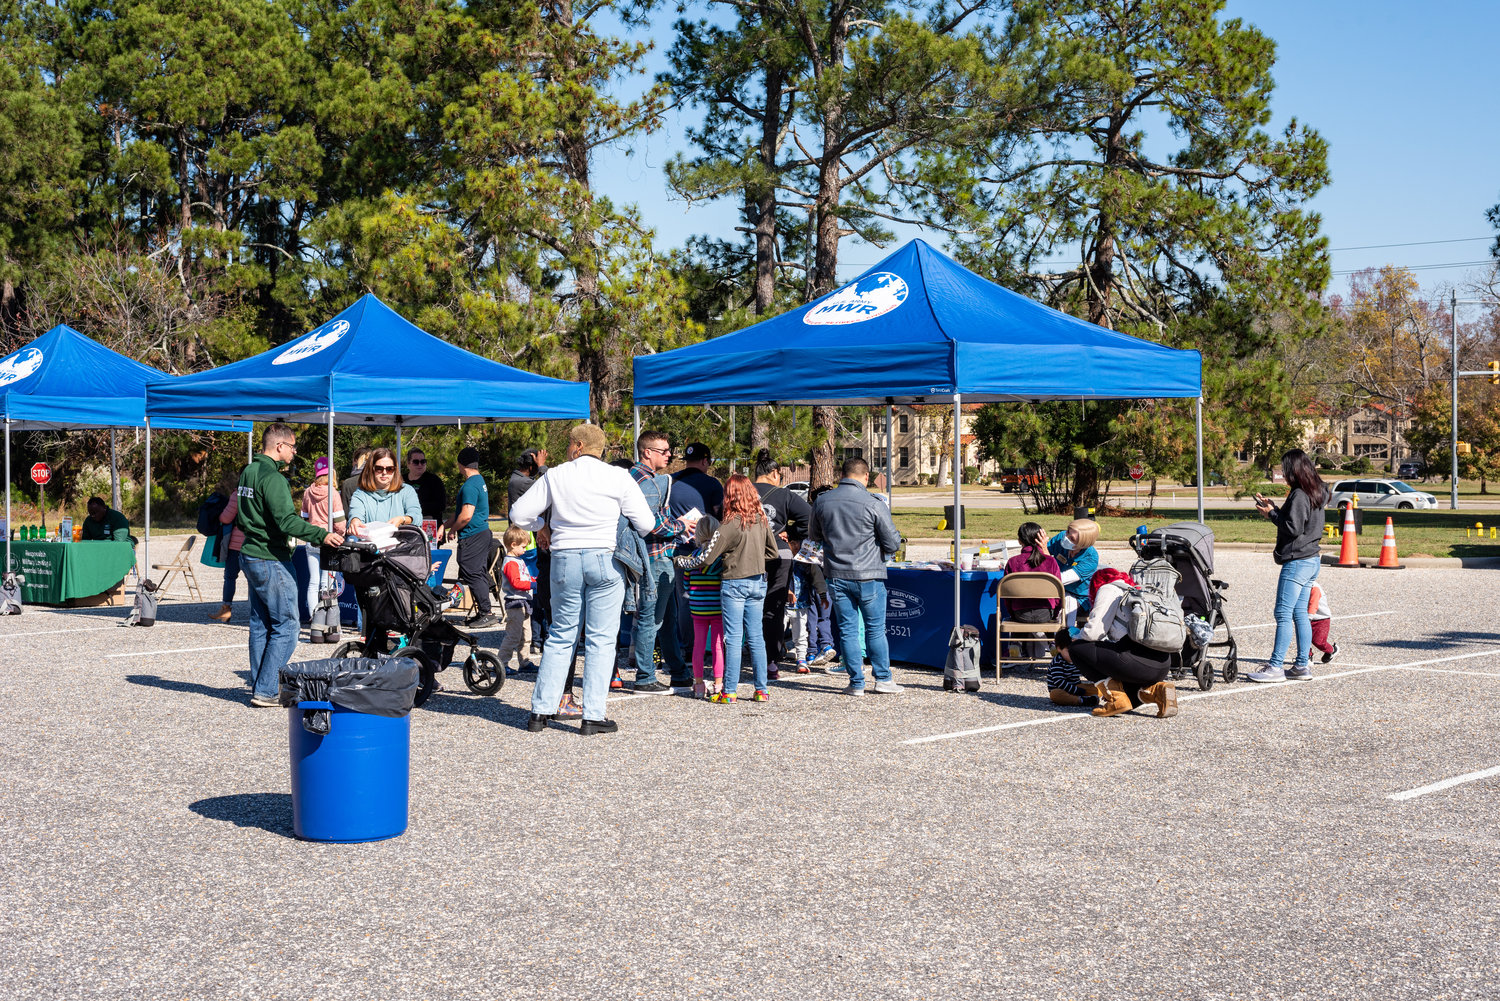 The Fort Bragg Block Party was held on Nov. 19 at the Tolson Youth Center.